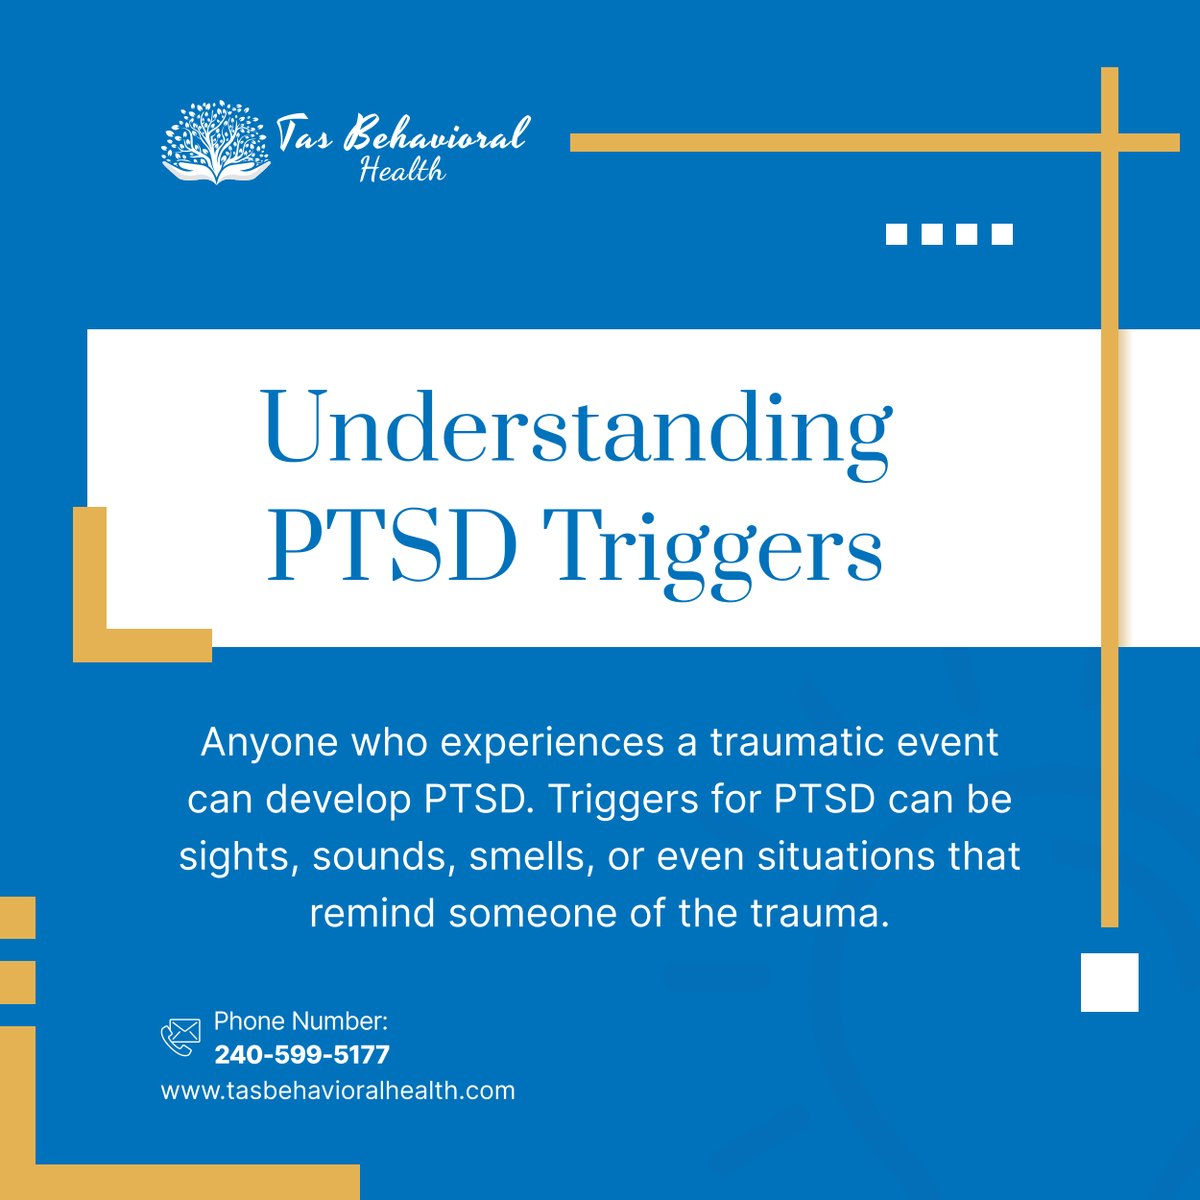 Post-Traumatic Stress Disorder (PTSD) can be triggered by seemingly ordinary things. If you or someone you know is struggling with PTSD, there is help available. #CumberlandMD #MentalHealthClinic #PTSDAwareness